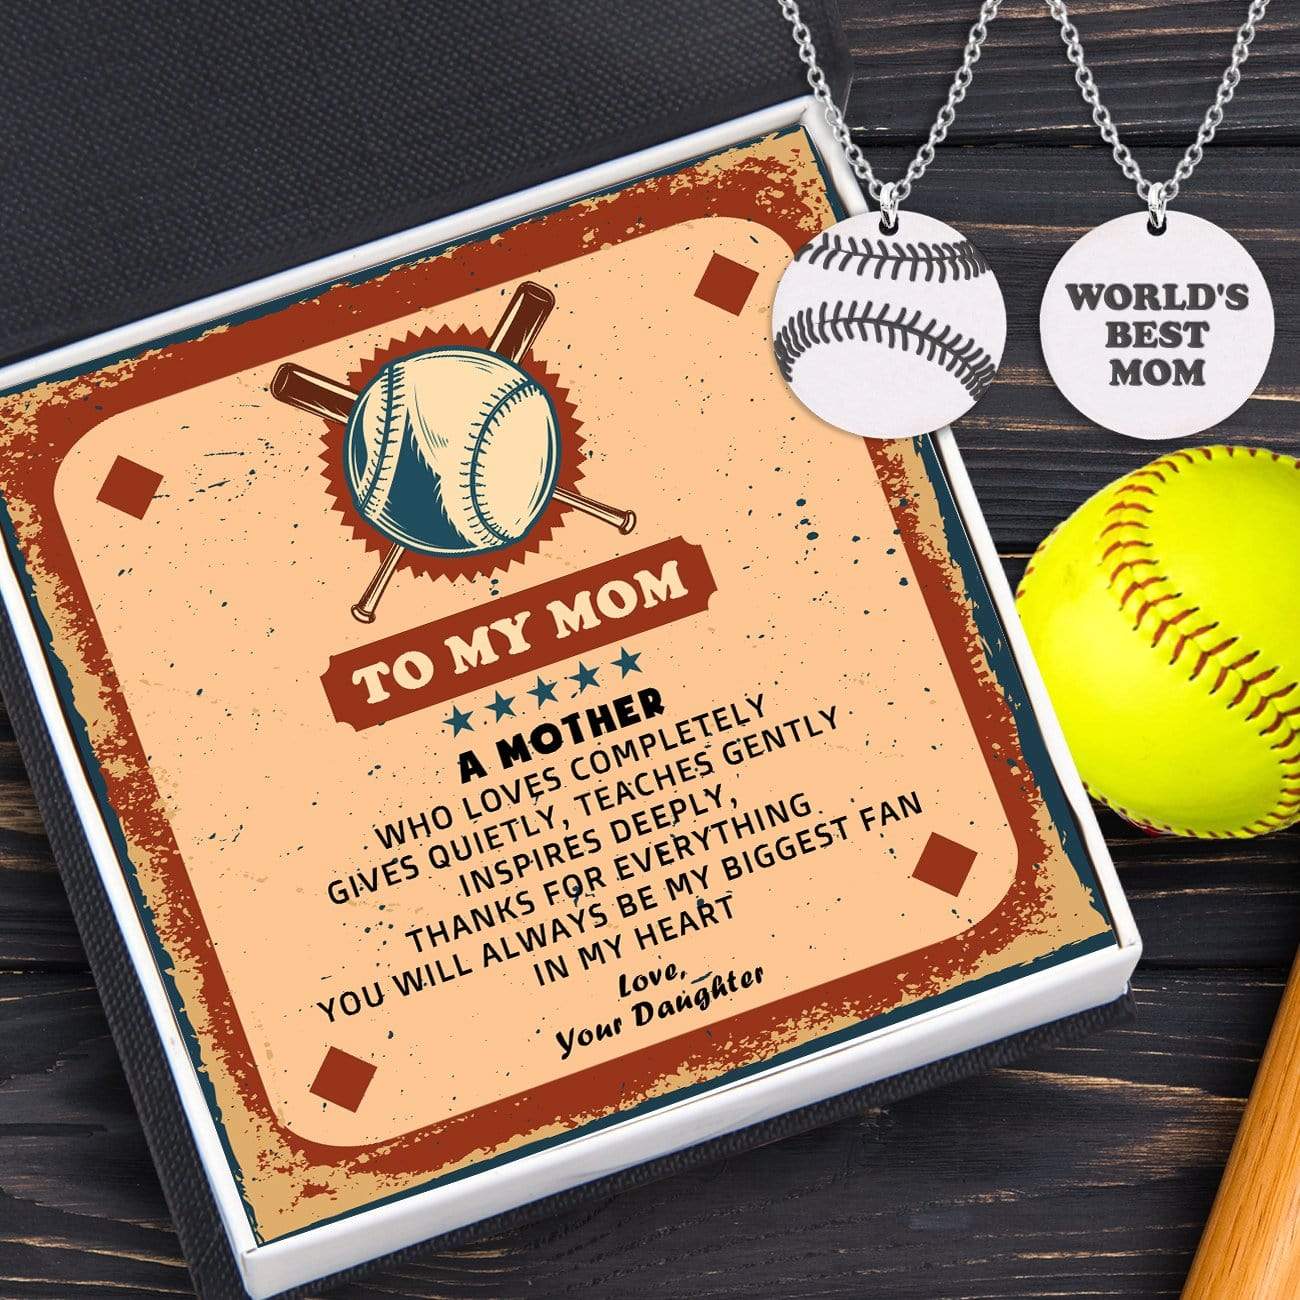 Baseball Ball Necklace - Softball - To My Mom - You Will Always Be My Biggest Fan In My Heart - Gnev19009